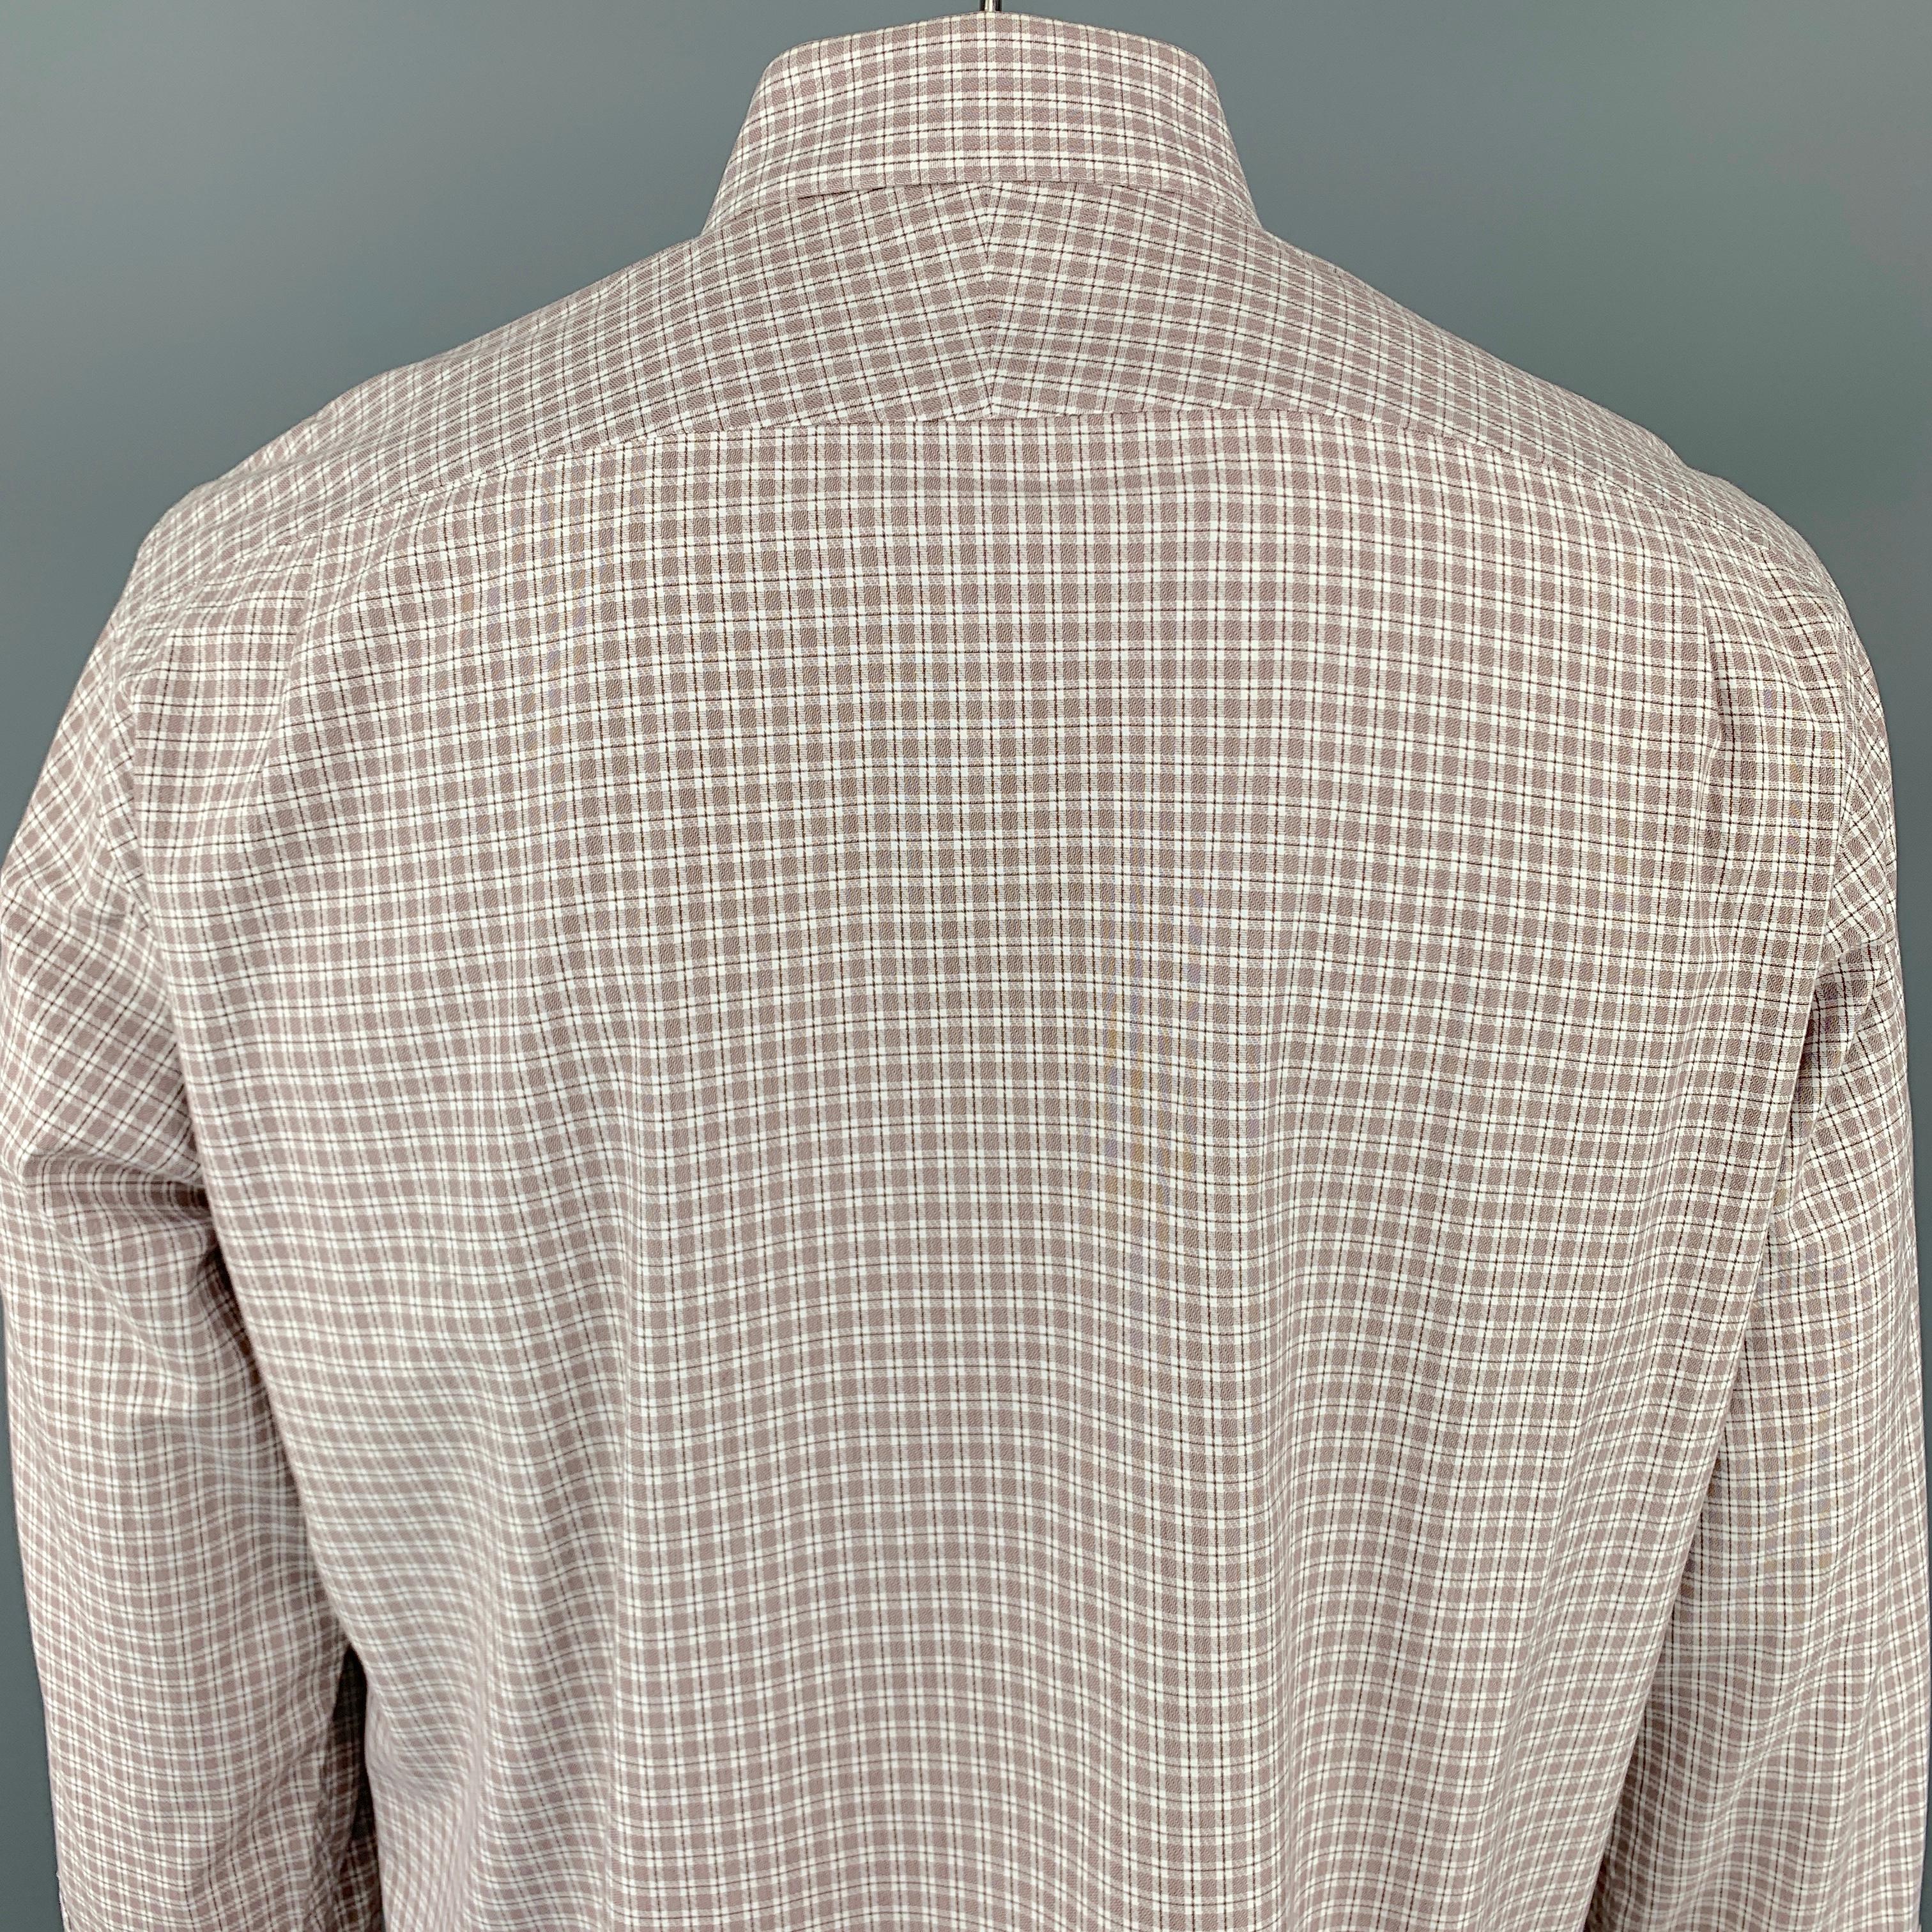 Men's TOM FORD Size XL Brown & White Micro Plaid Cotton Button Up Long Sleeve Shirt